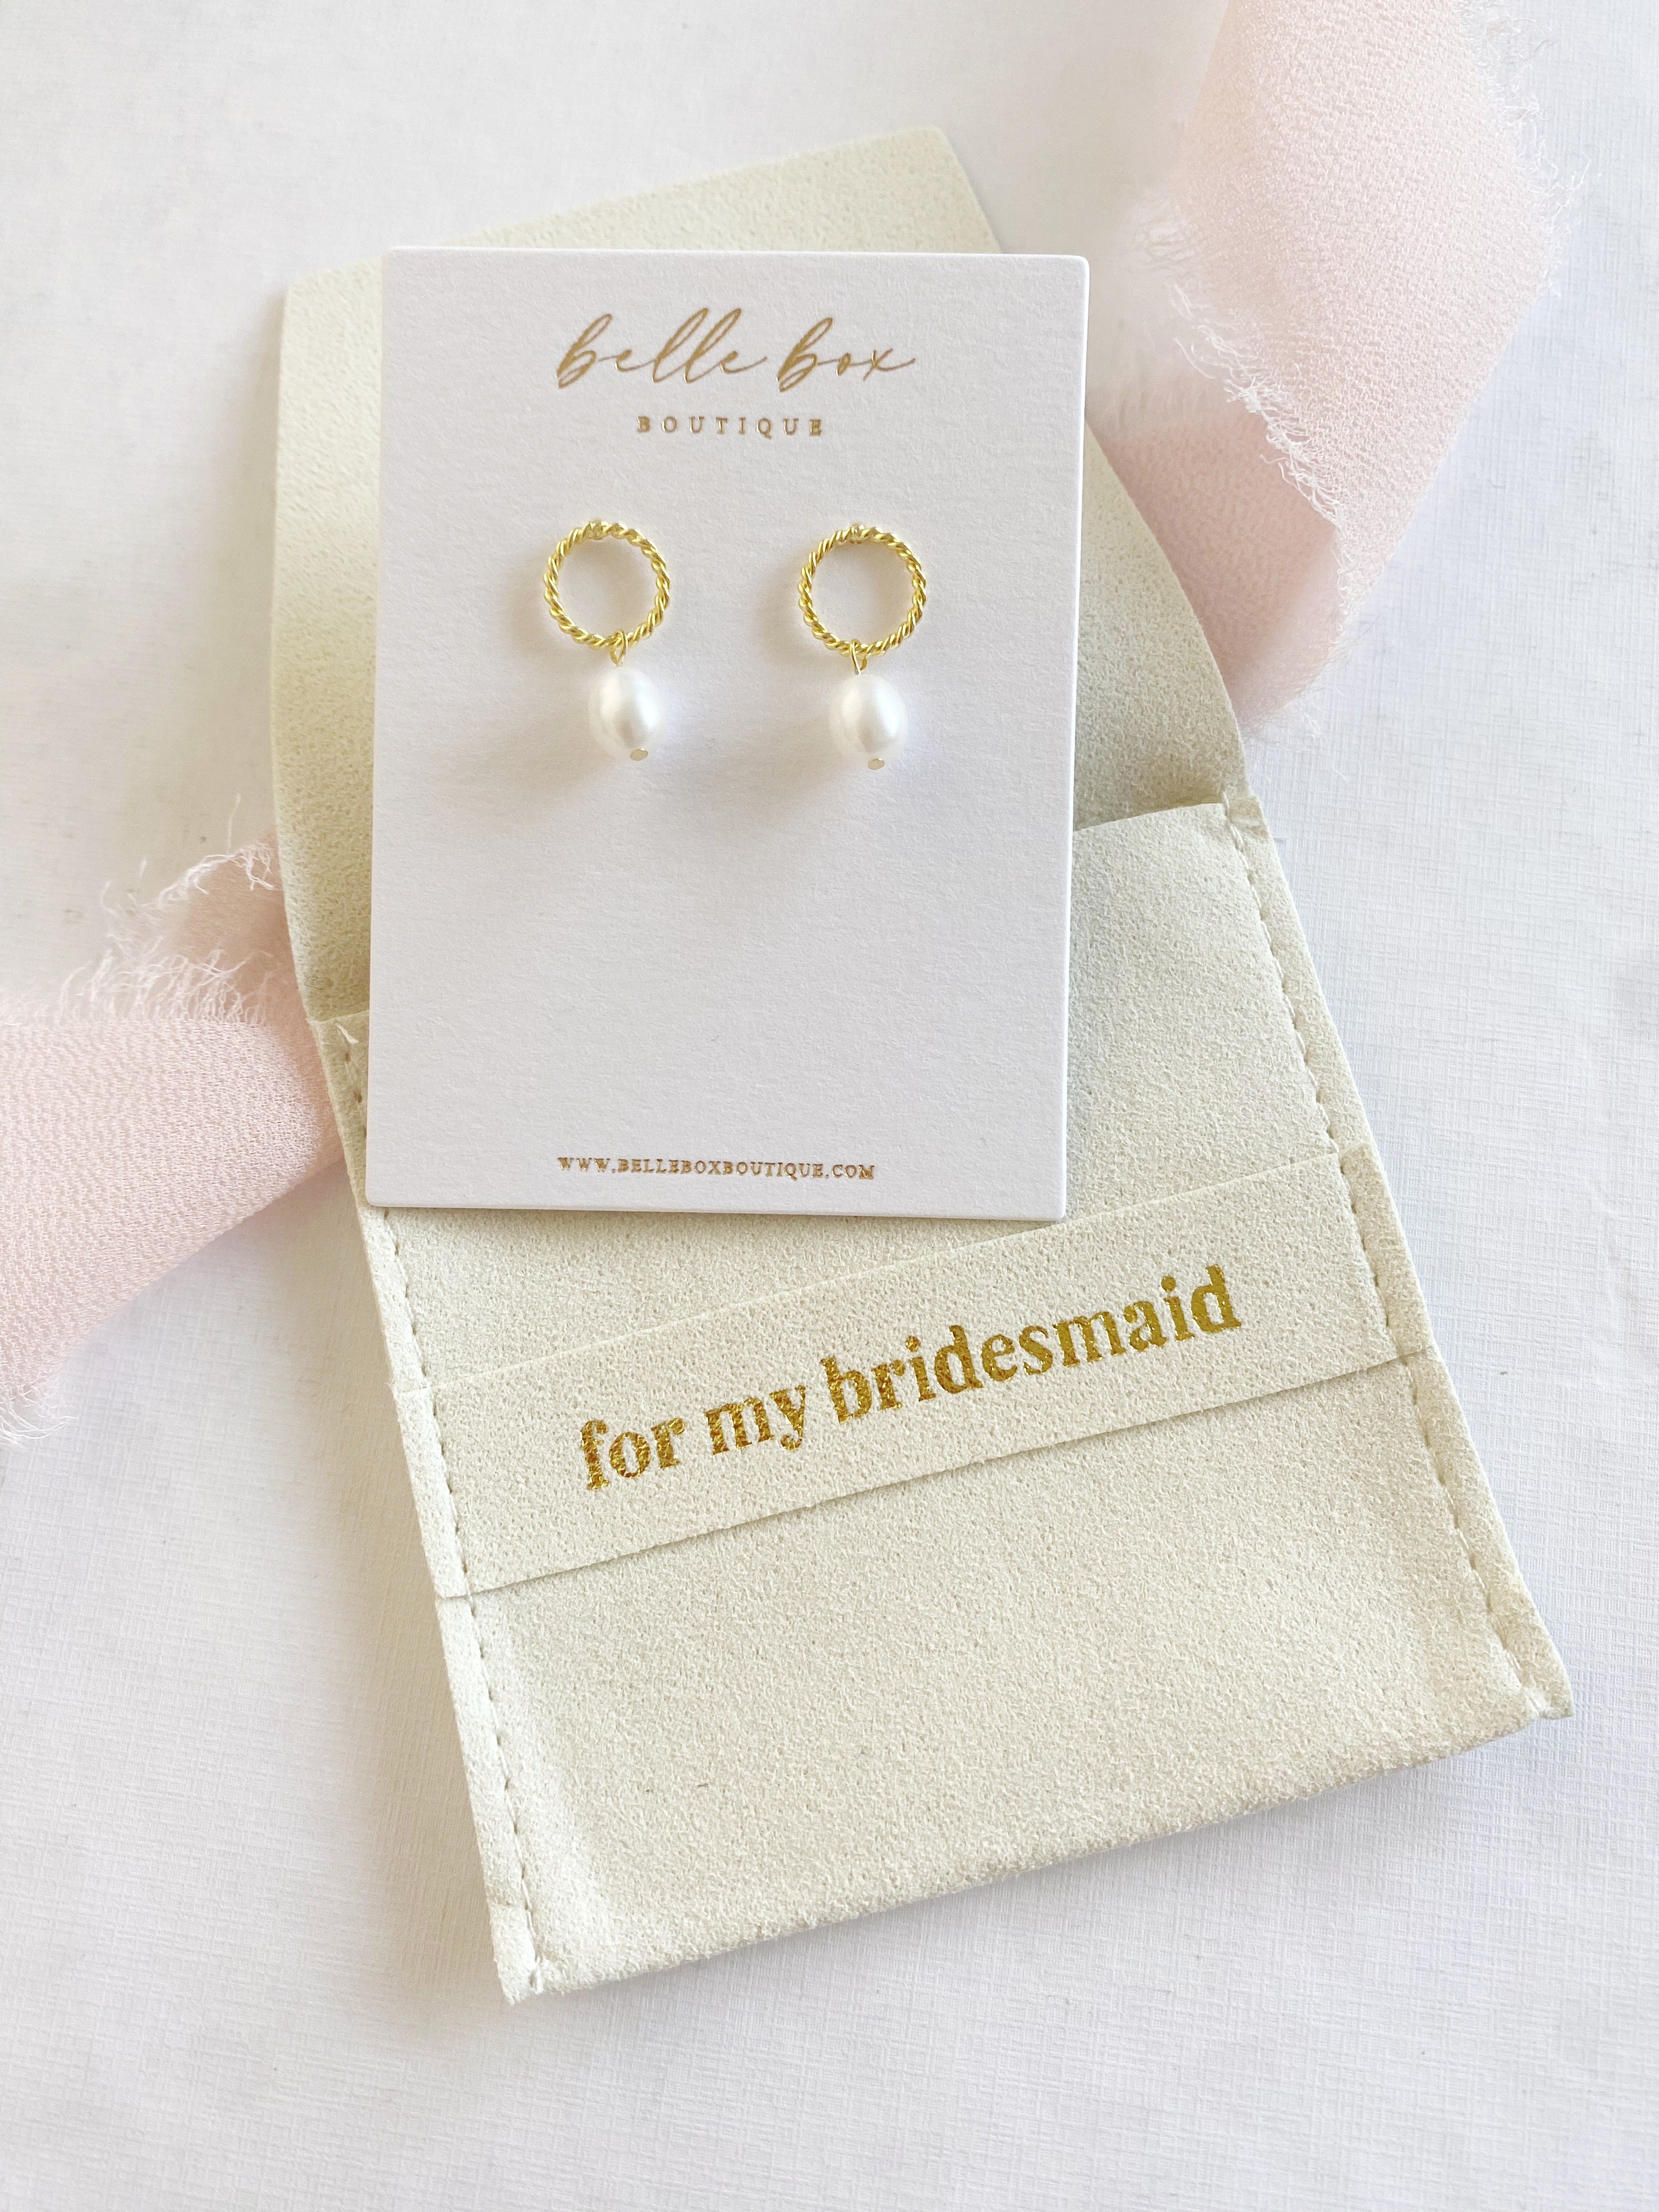 “for my bridesmaid” jewelry bag